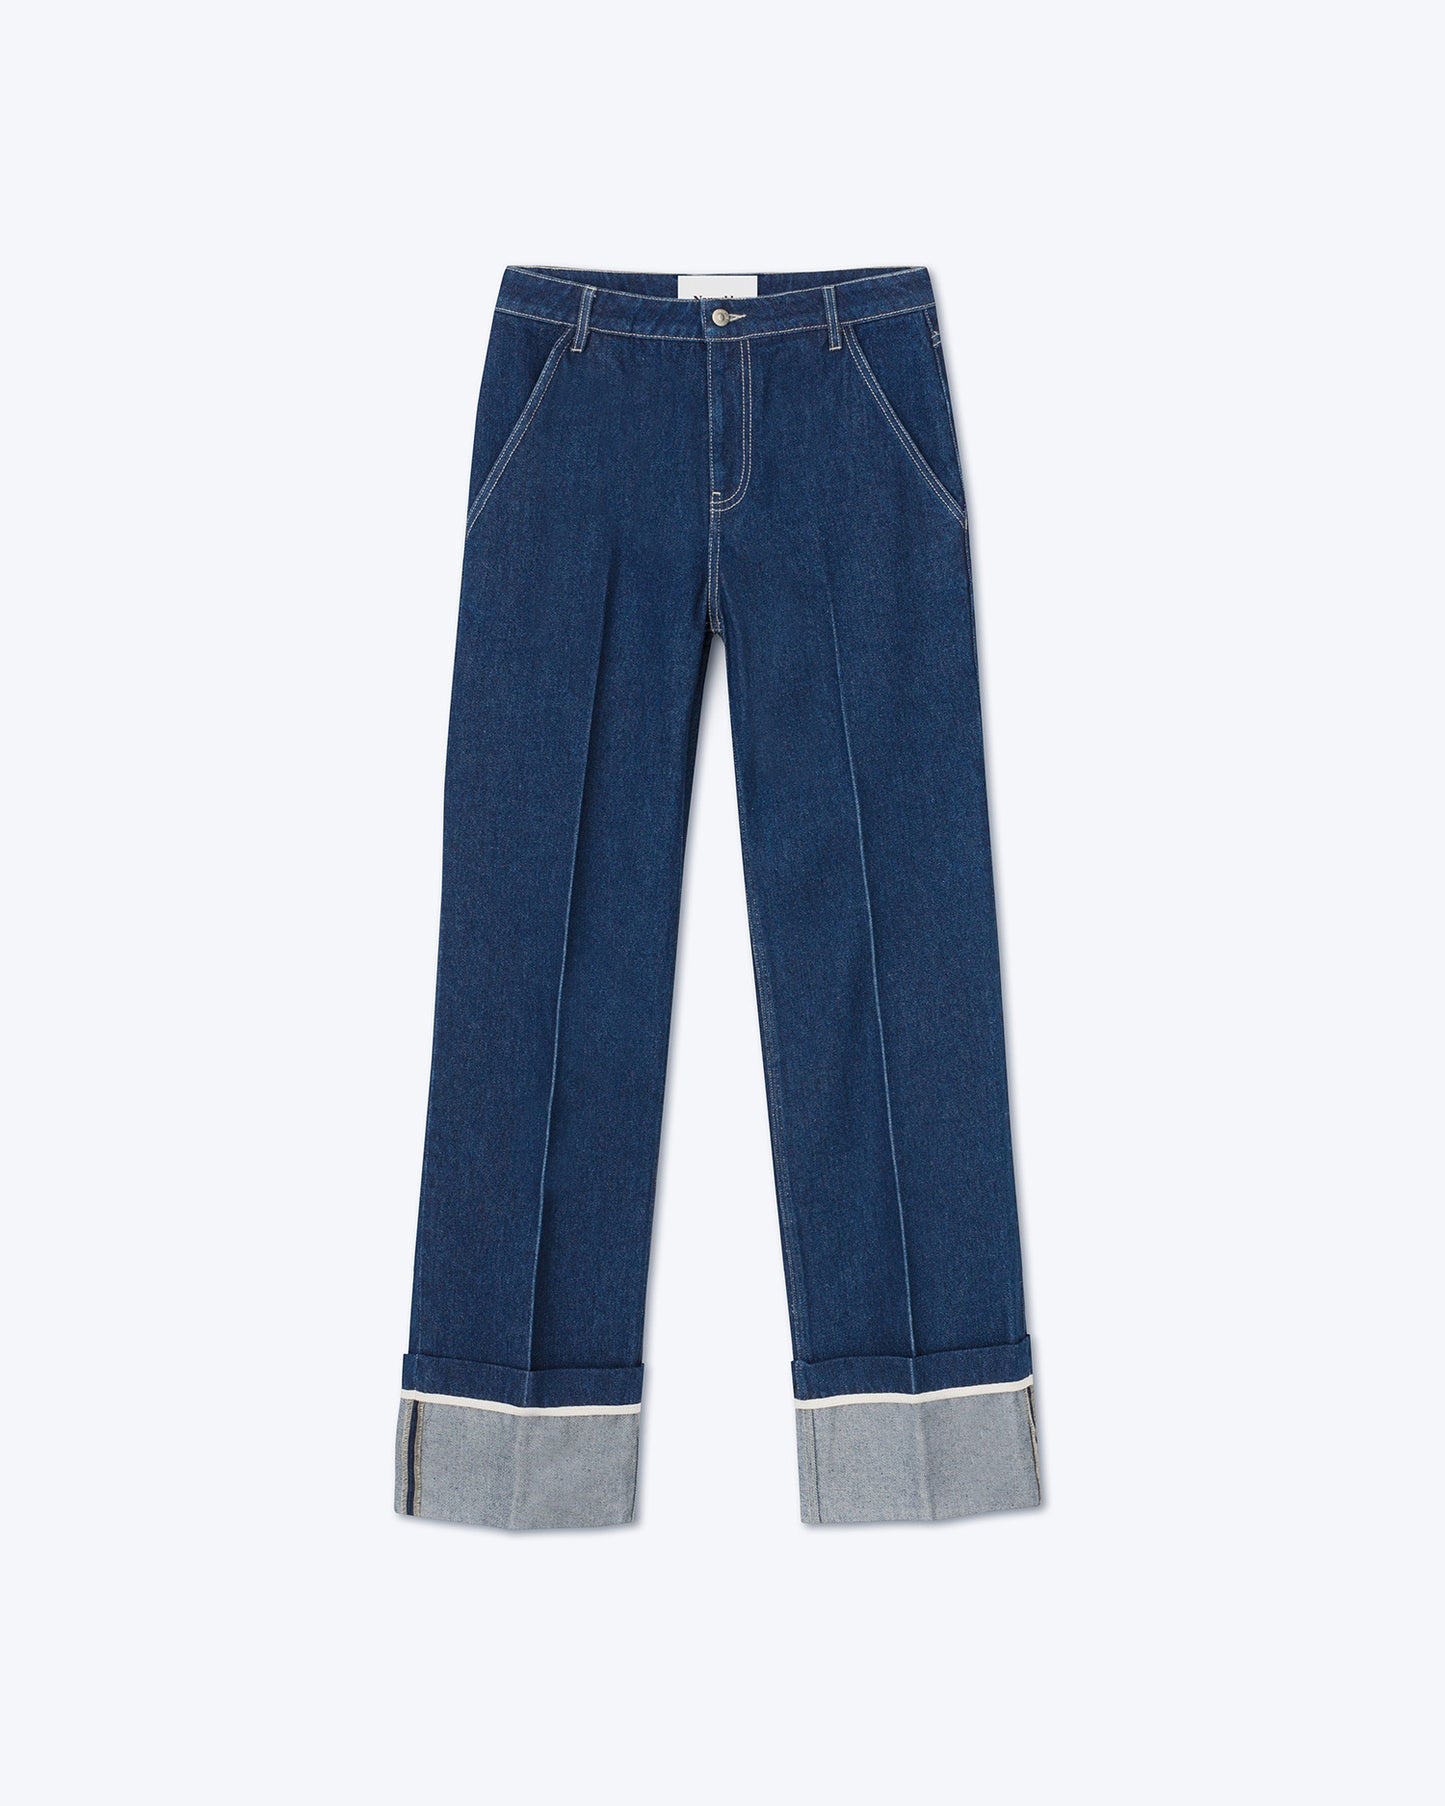 Meire - Turn Up Trousers - Eco Indigo